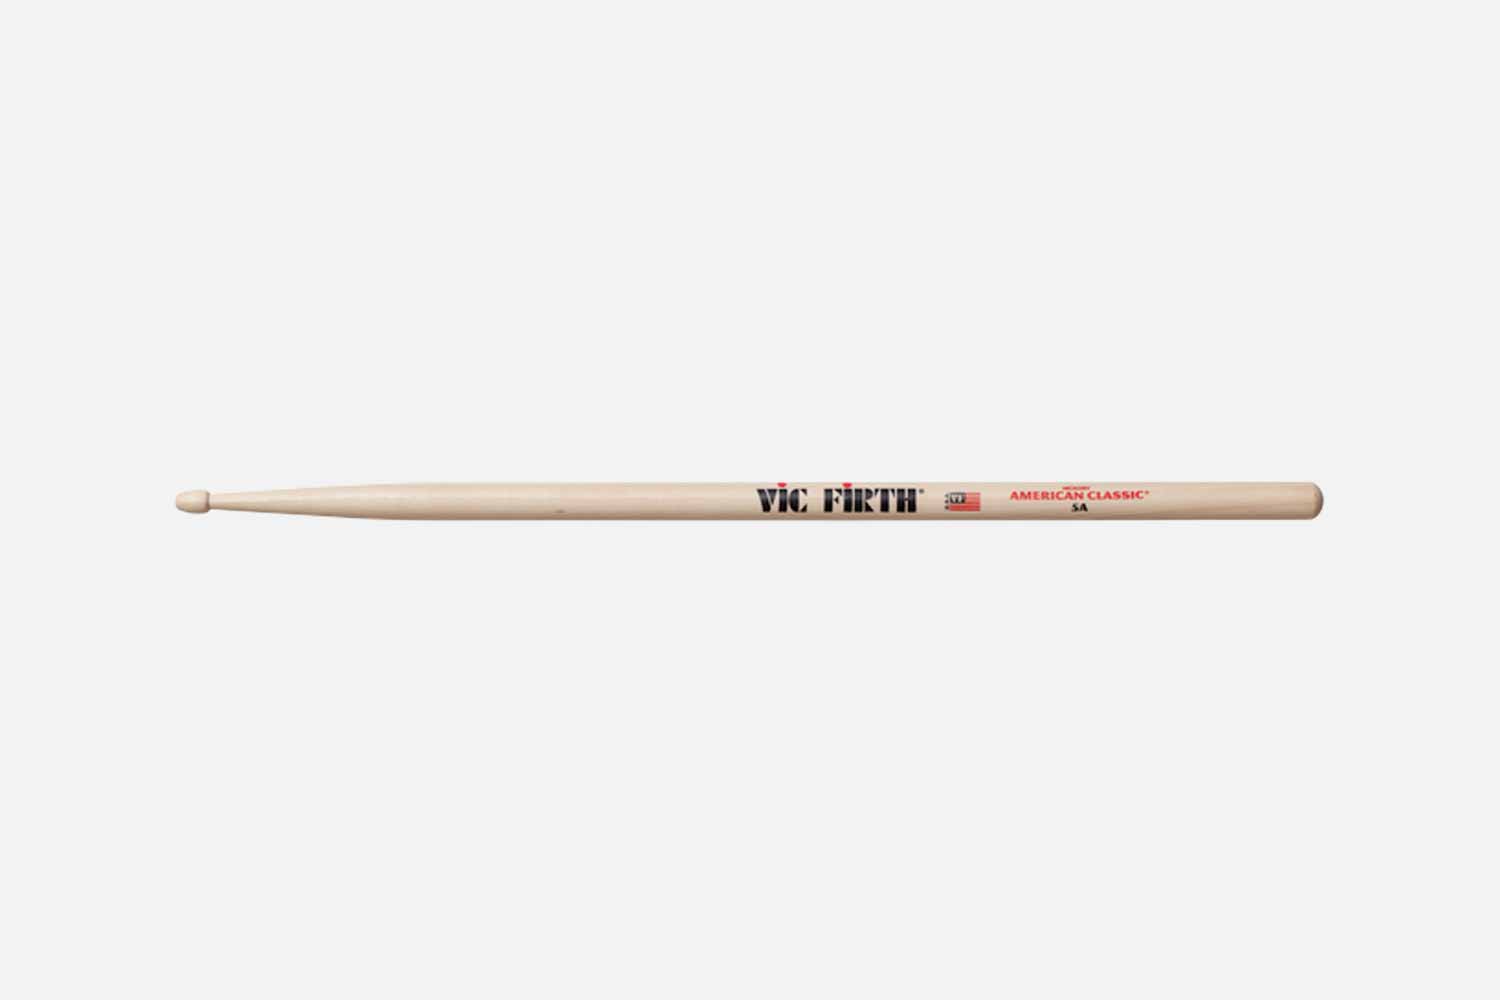 Vic firth 5A American Classic Hickory (5461325971620)